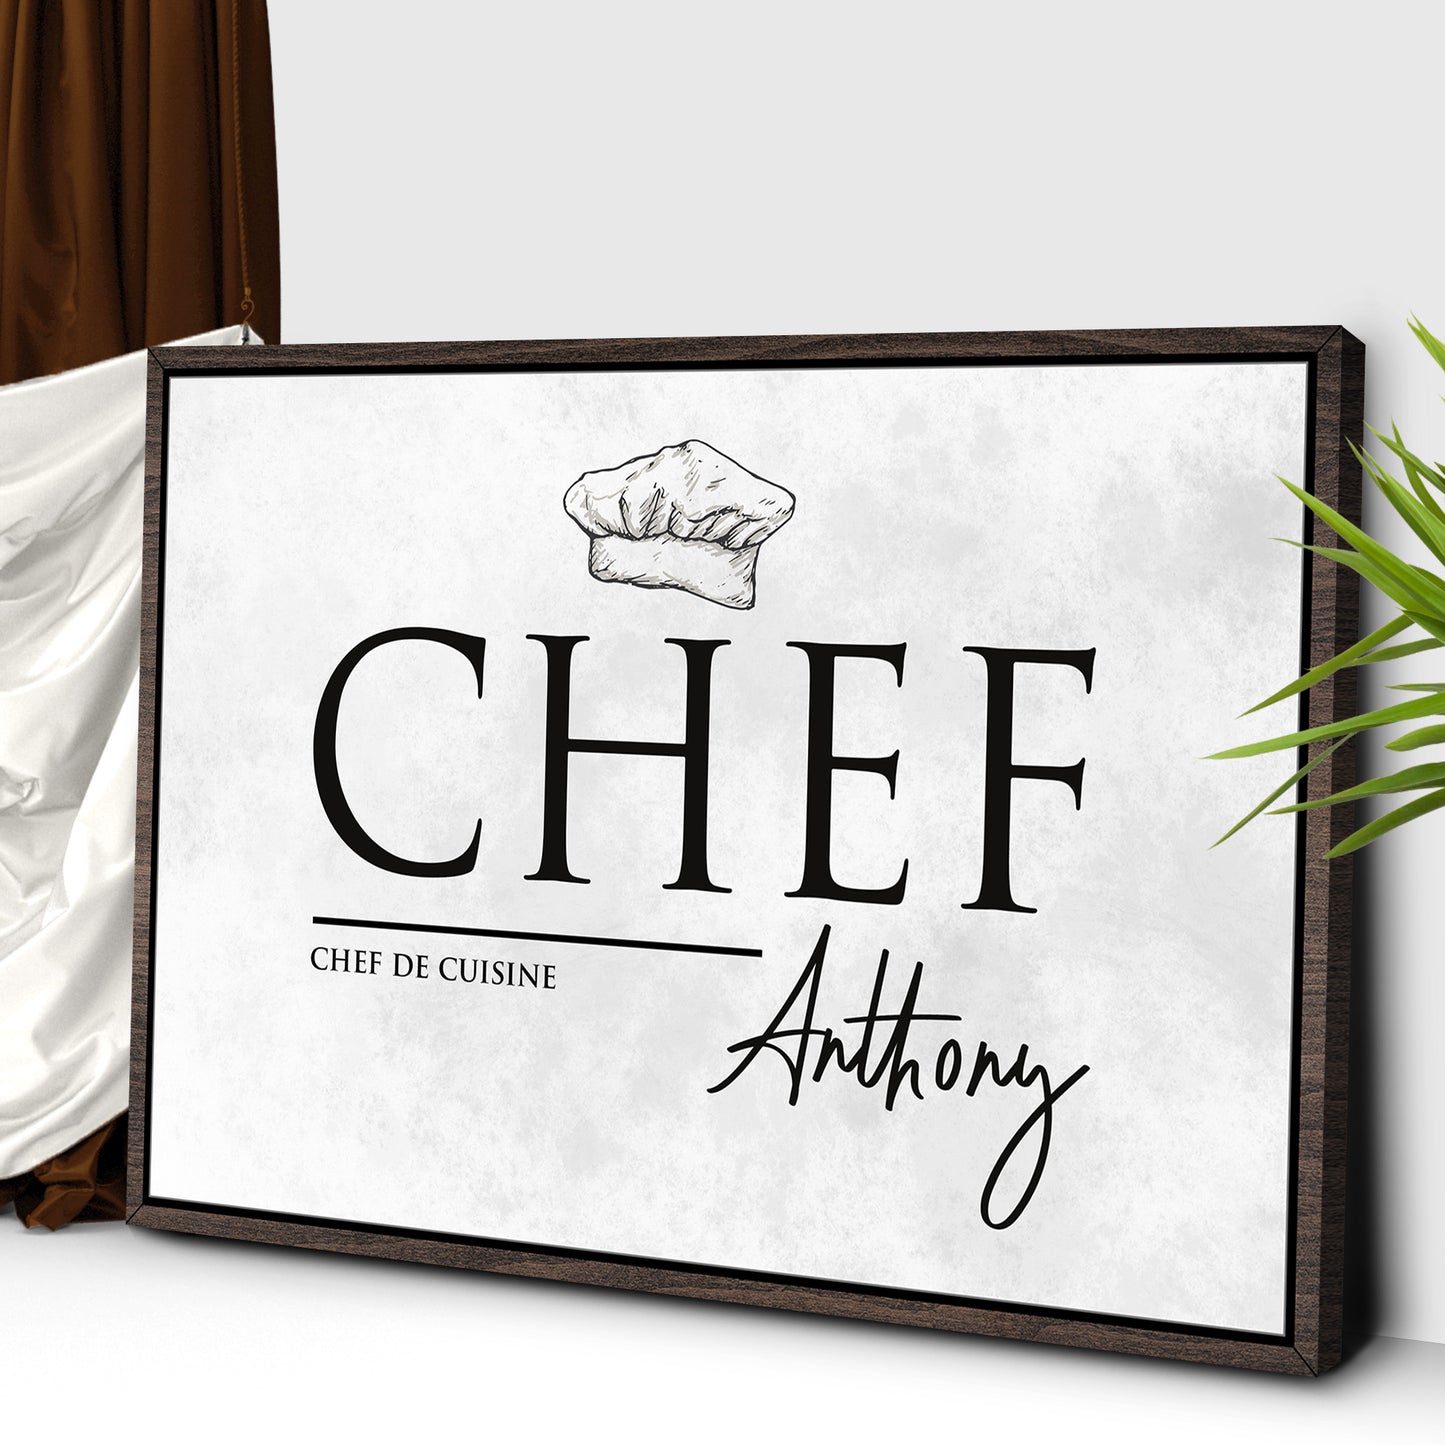 Chef De Cuisine Name Sign II - Image by Tailored Canvases